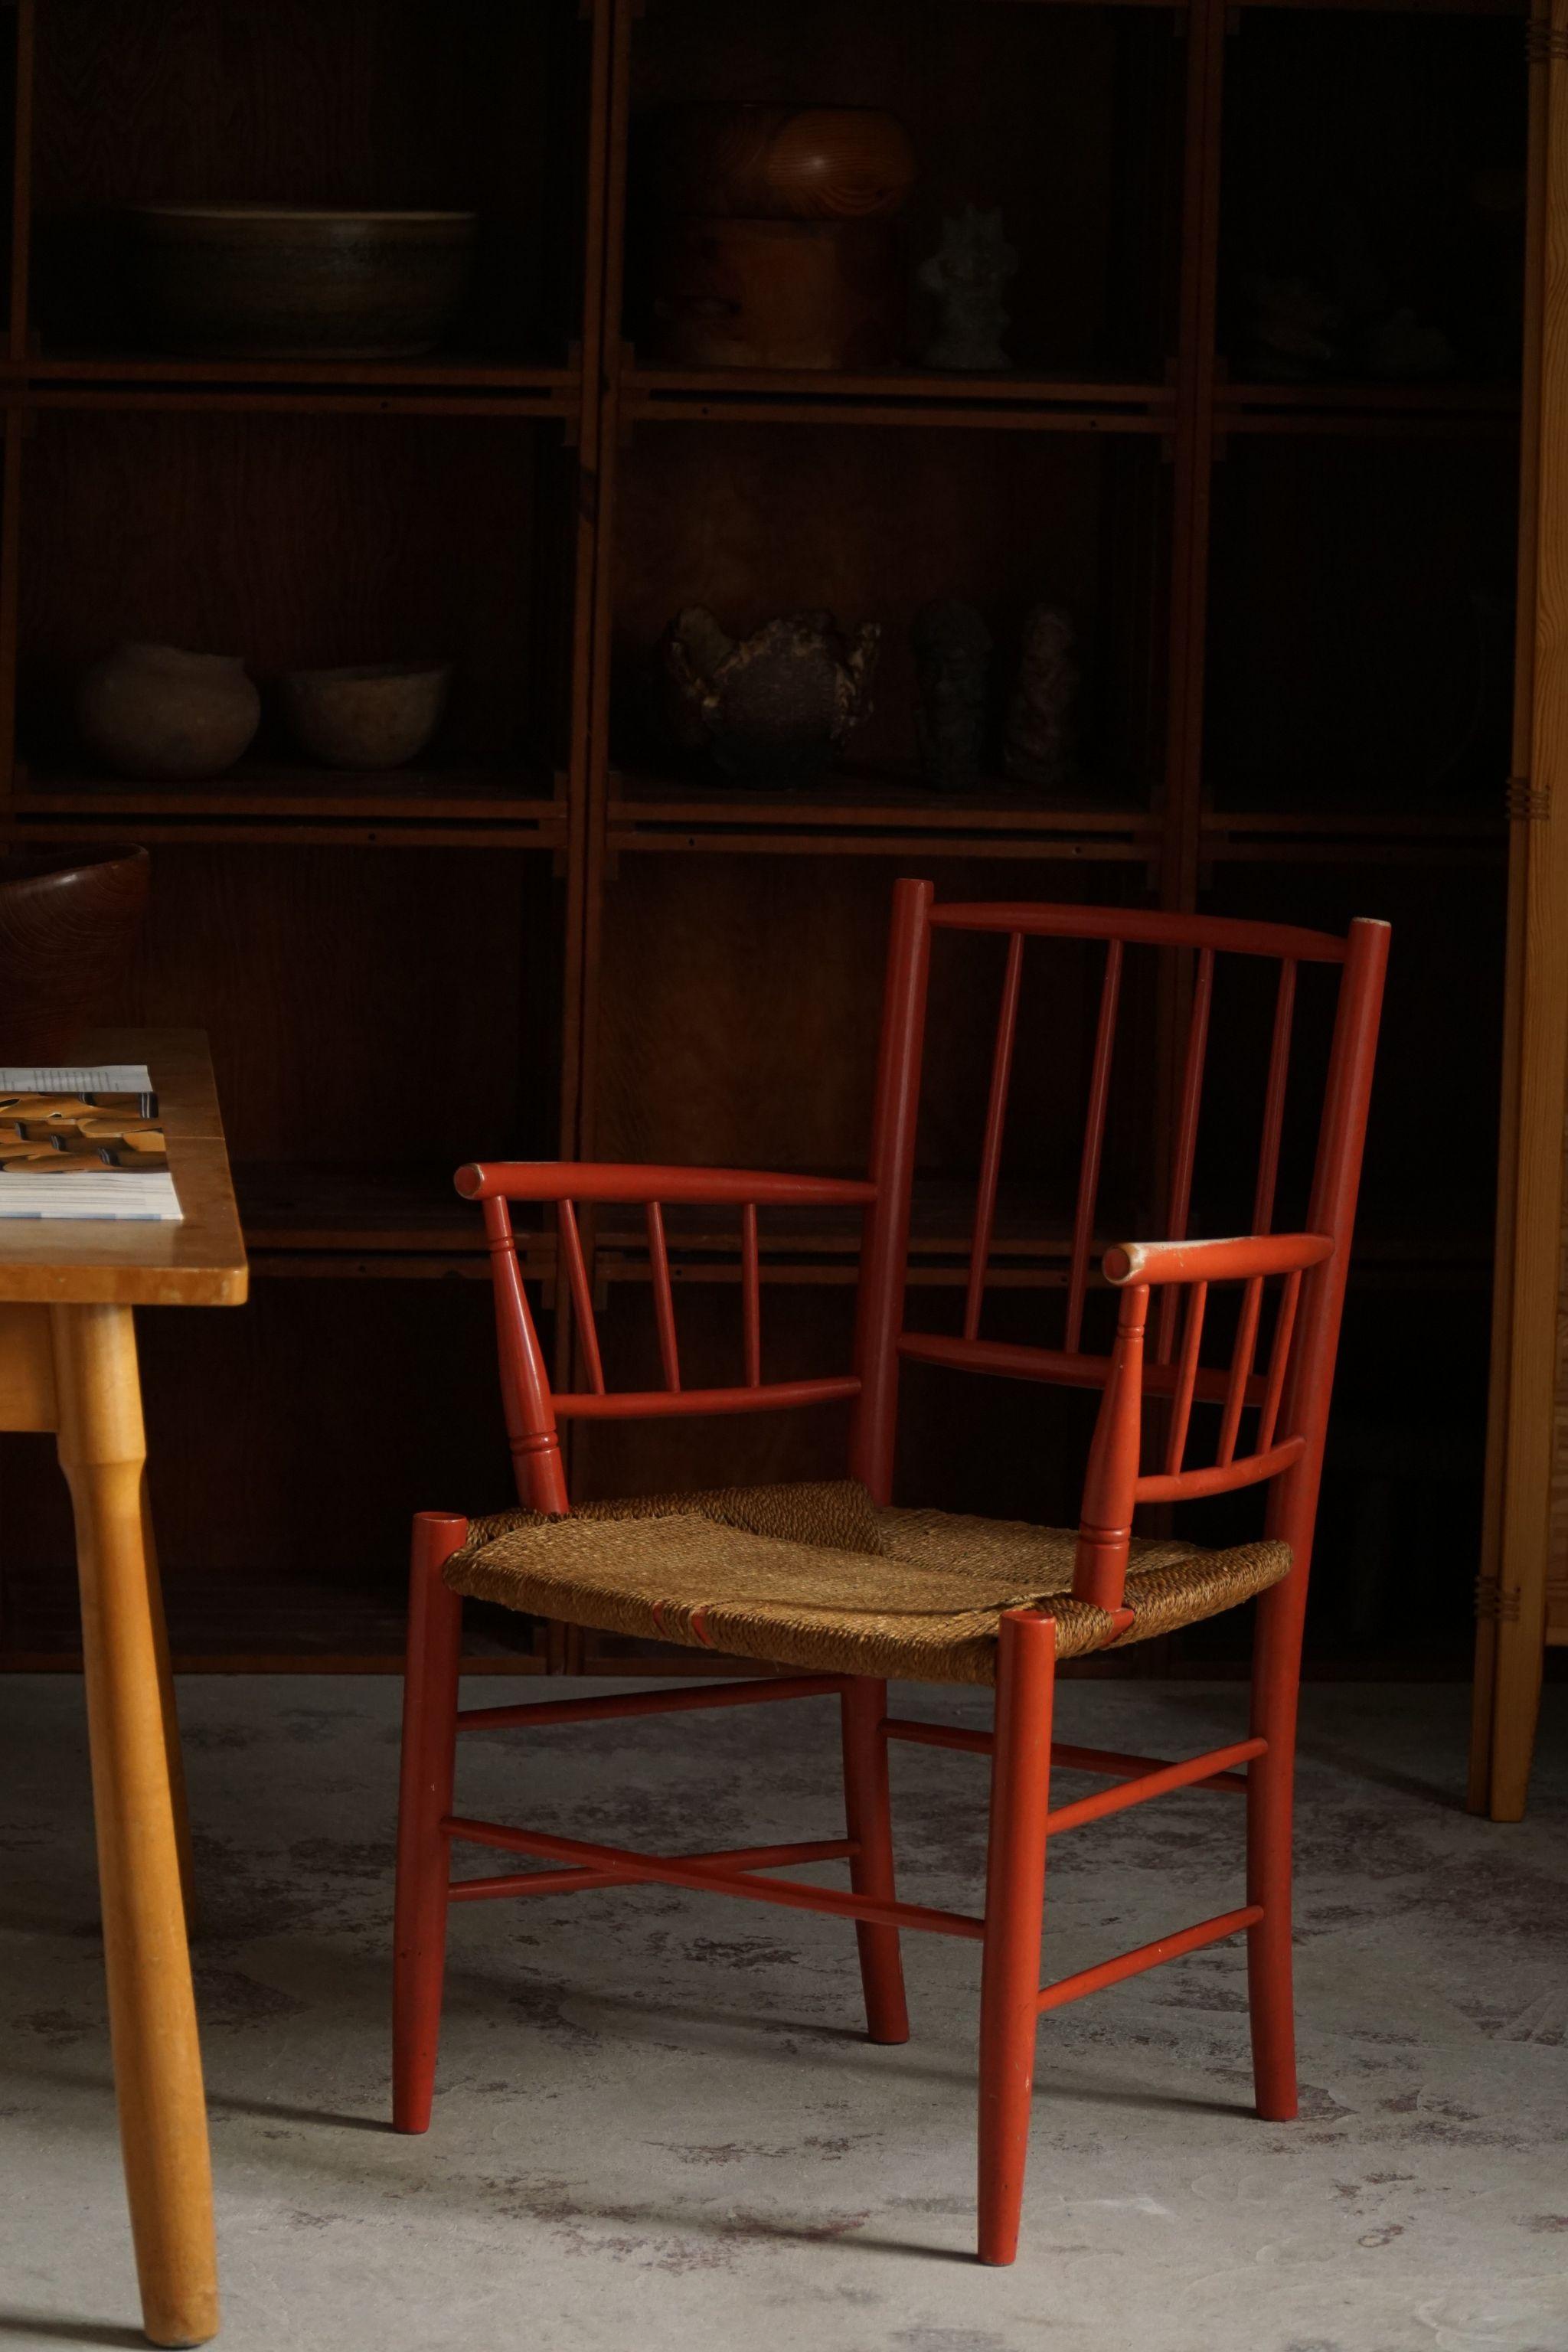 Rare set of 4 vintage beauties by Danish Artist Björn Wiinblad, made for Nässjö Stolefabrik in Sweden in the 1950s. A collectible set, red painted wood with a great patina and woven seagrass seats. 

A decorativ set for the modern interior. A warm